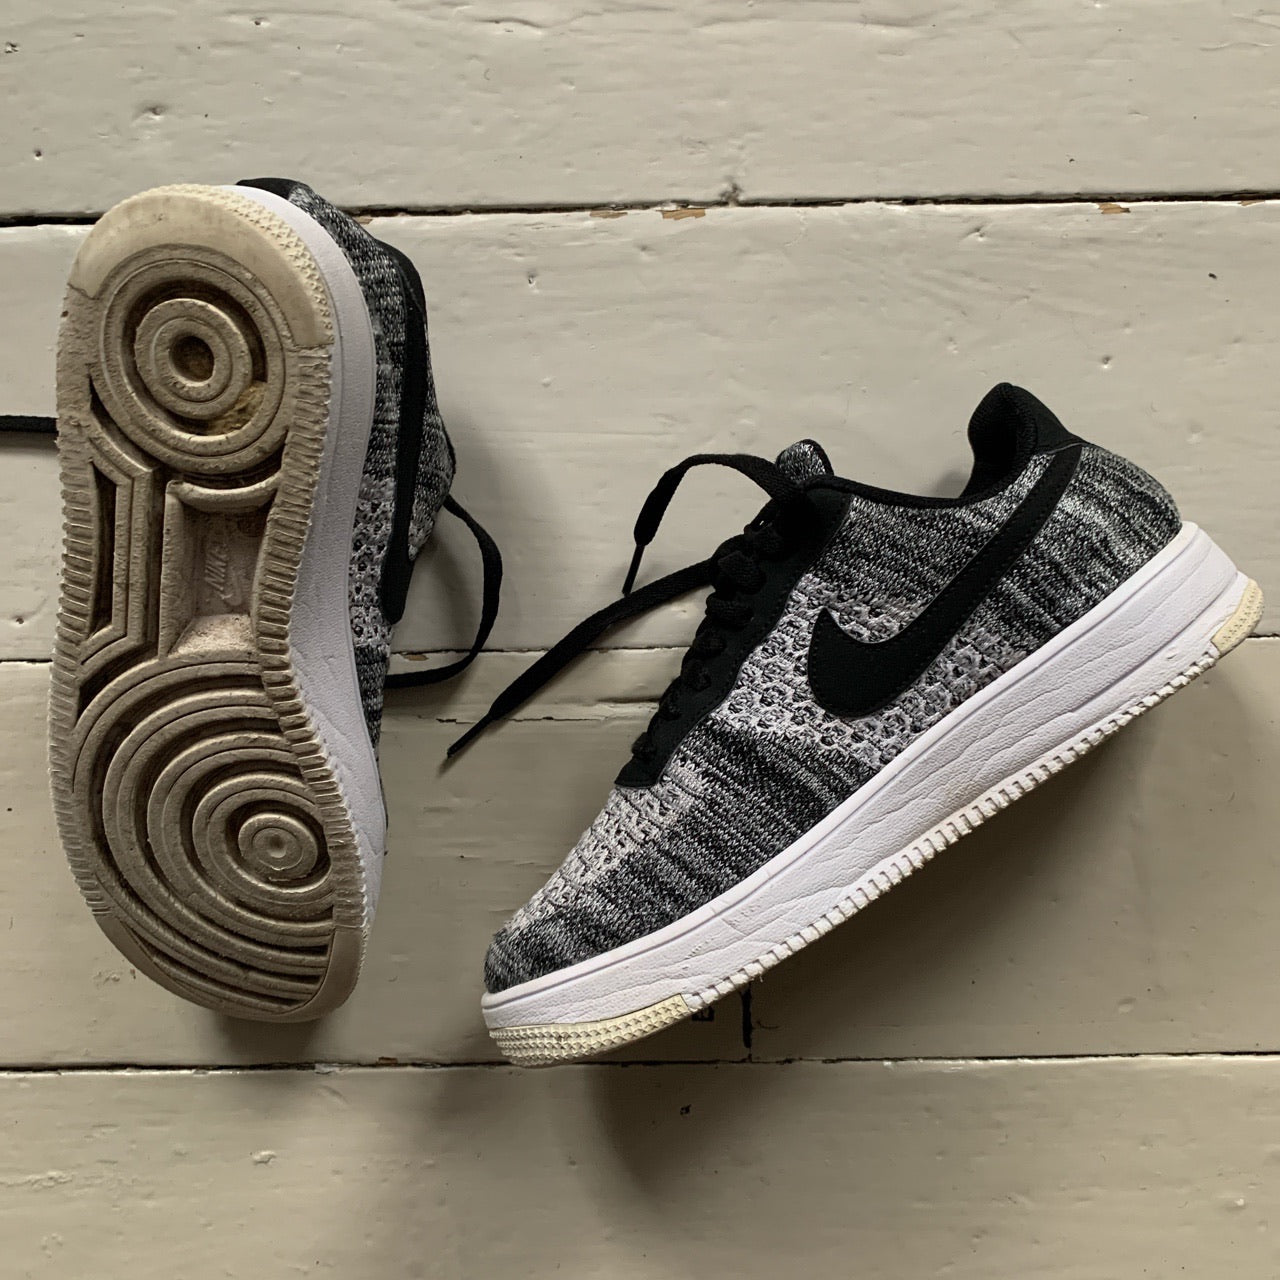 Nike Air Force 1 Flyknit Black and White (UK 8)